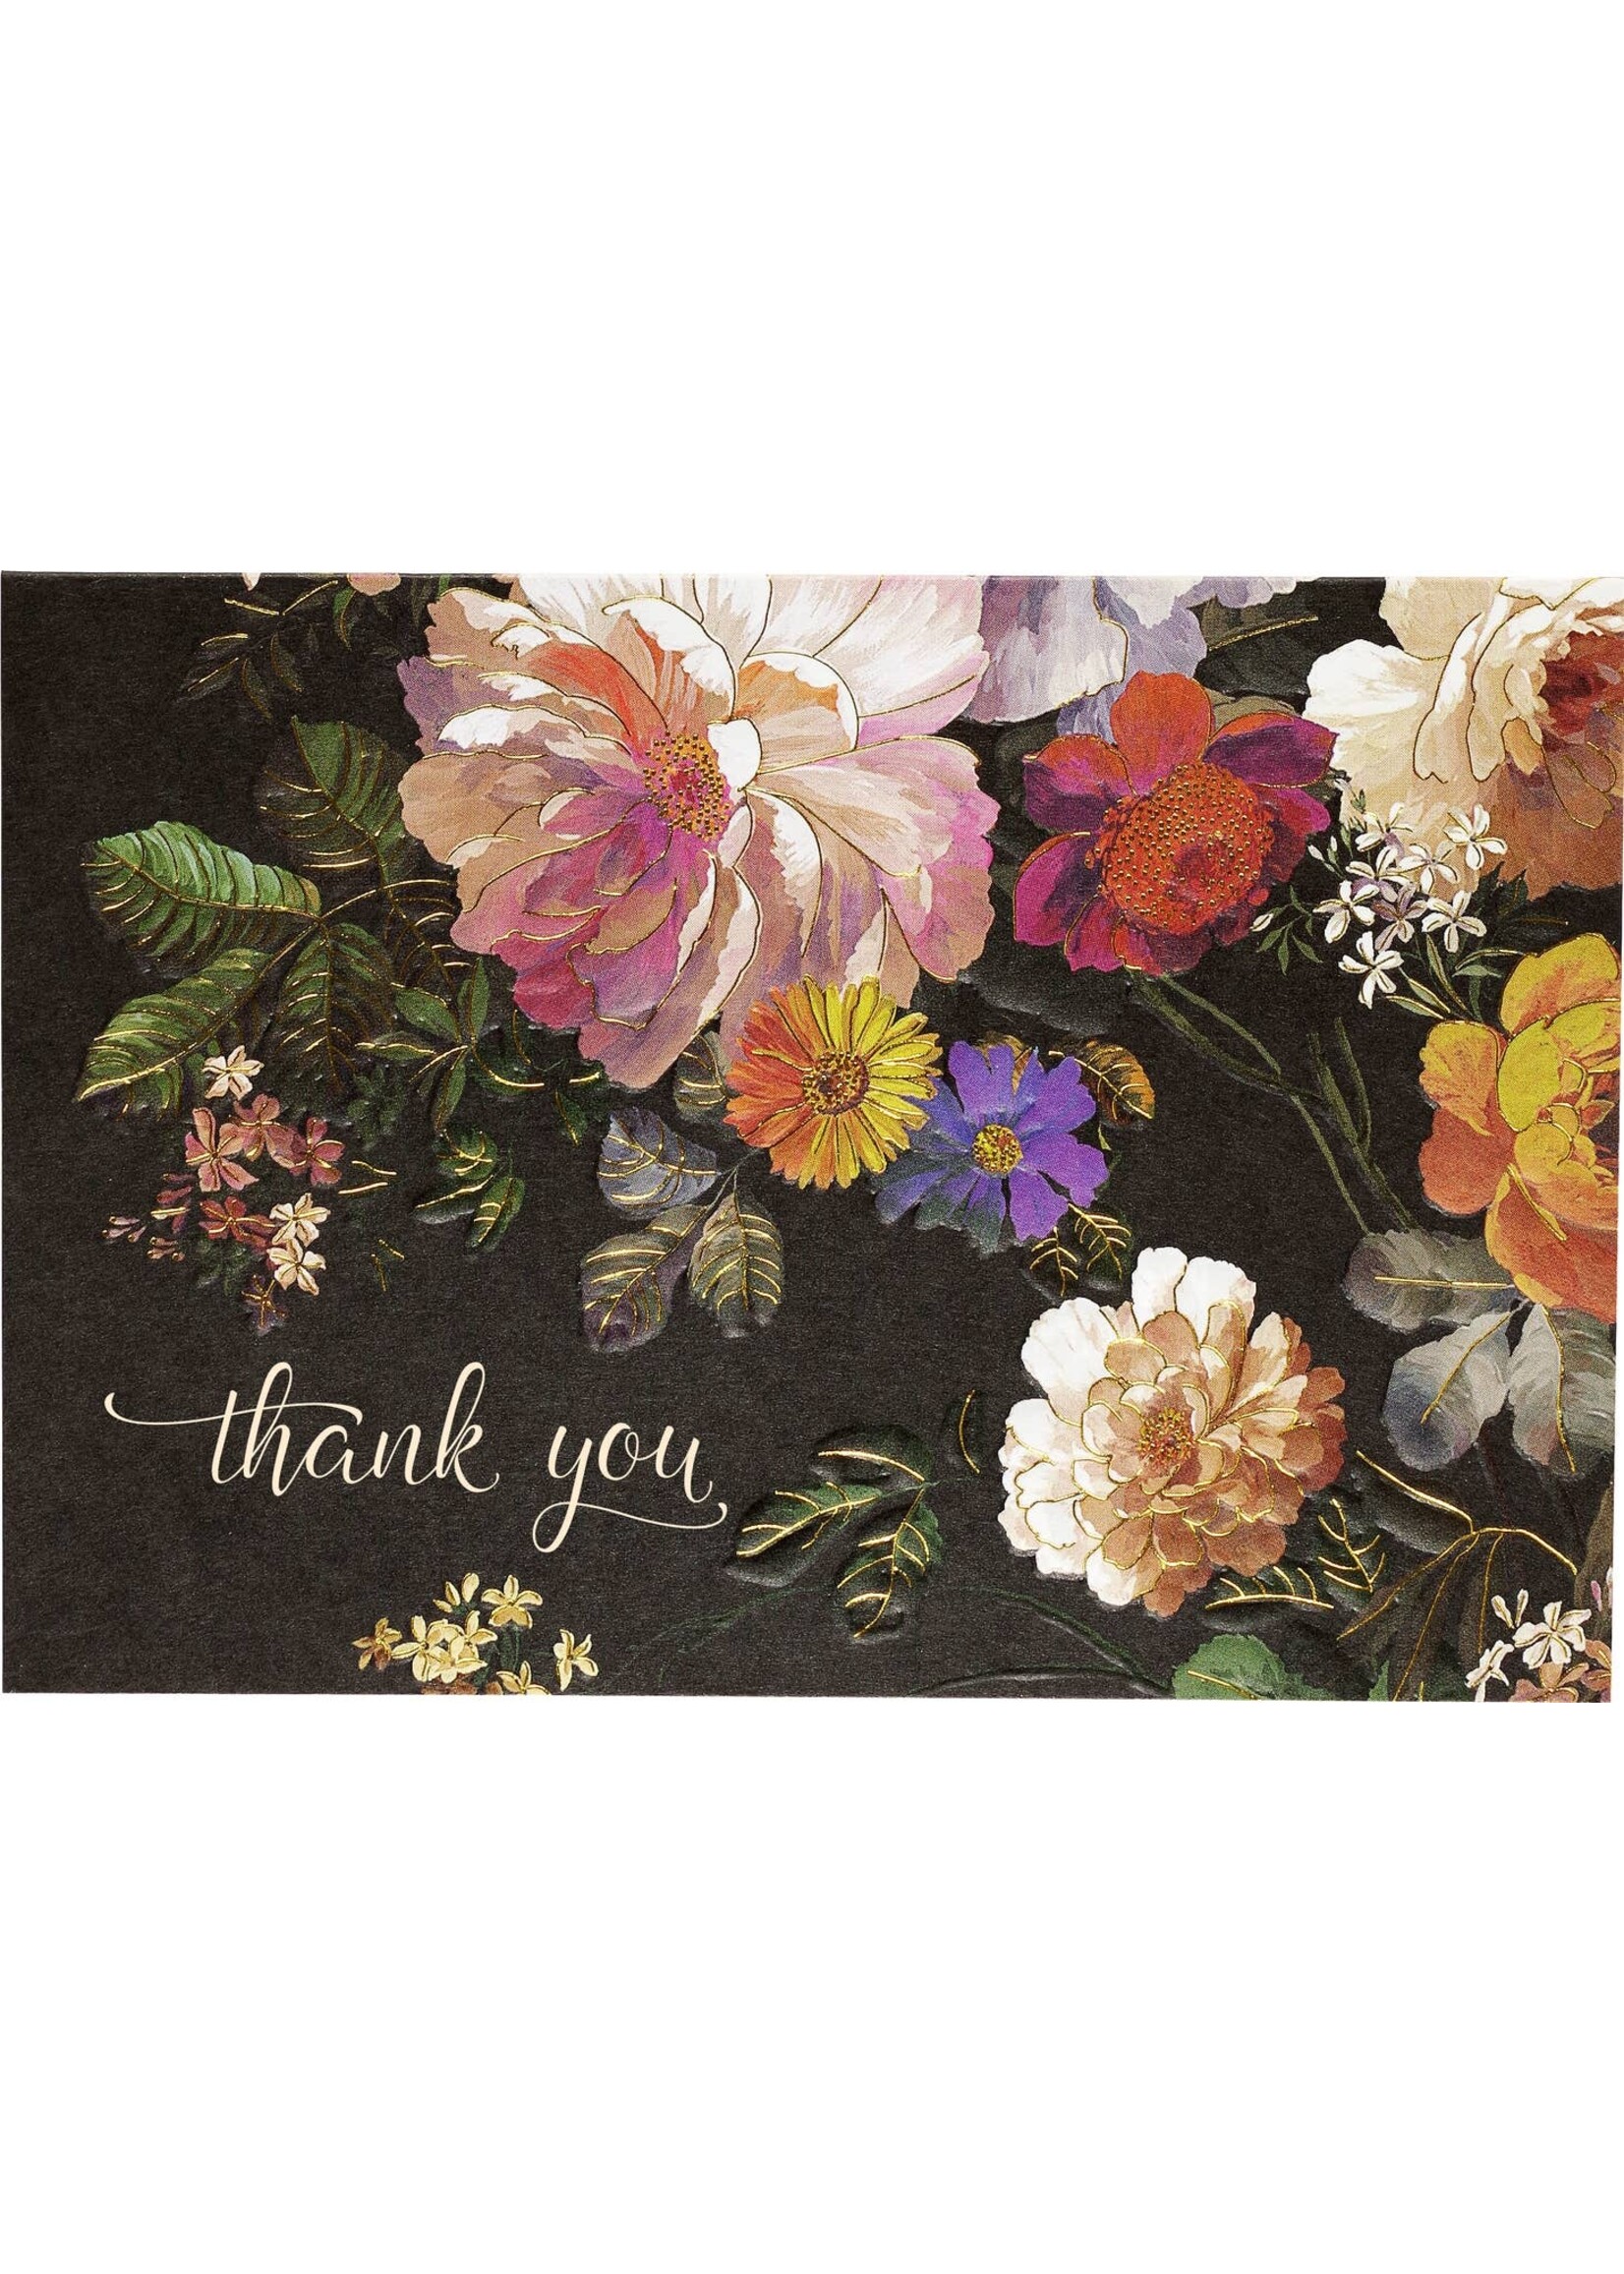 PPP THANK YOU CARD MIDNIGHT FLORAL